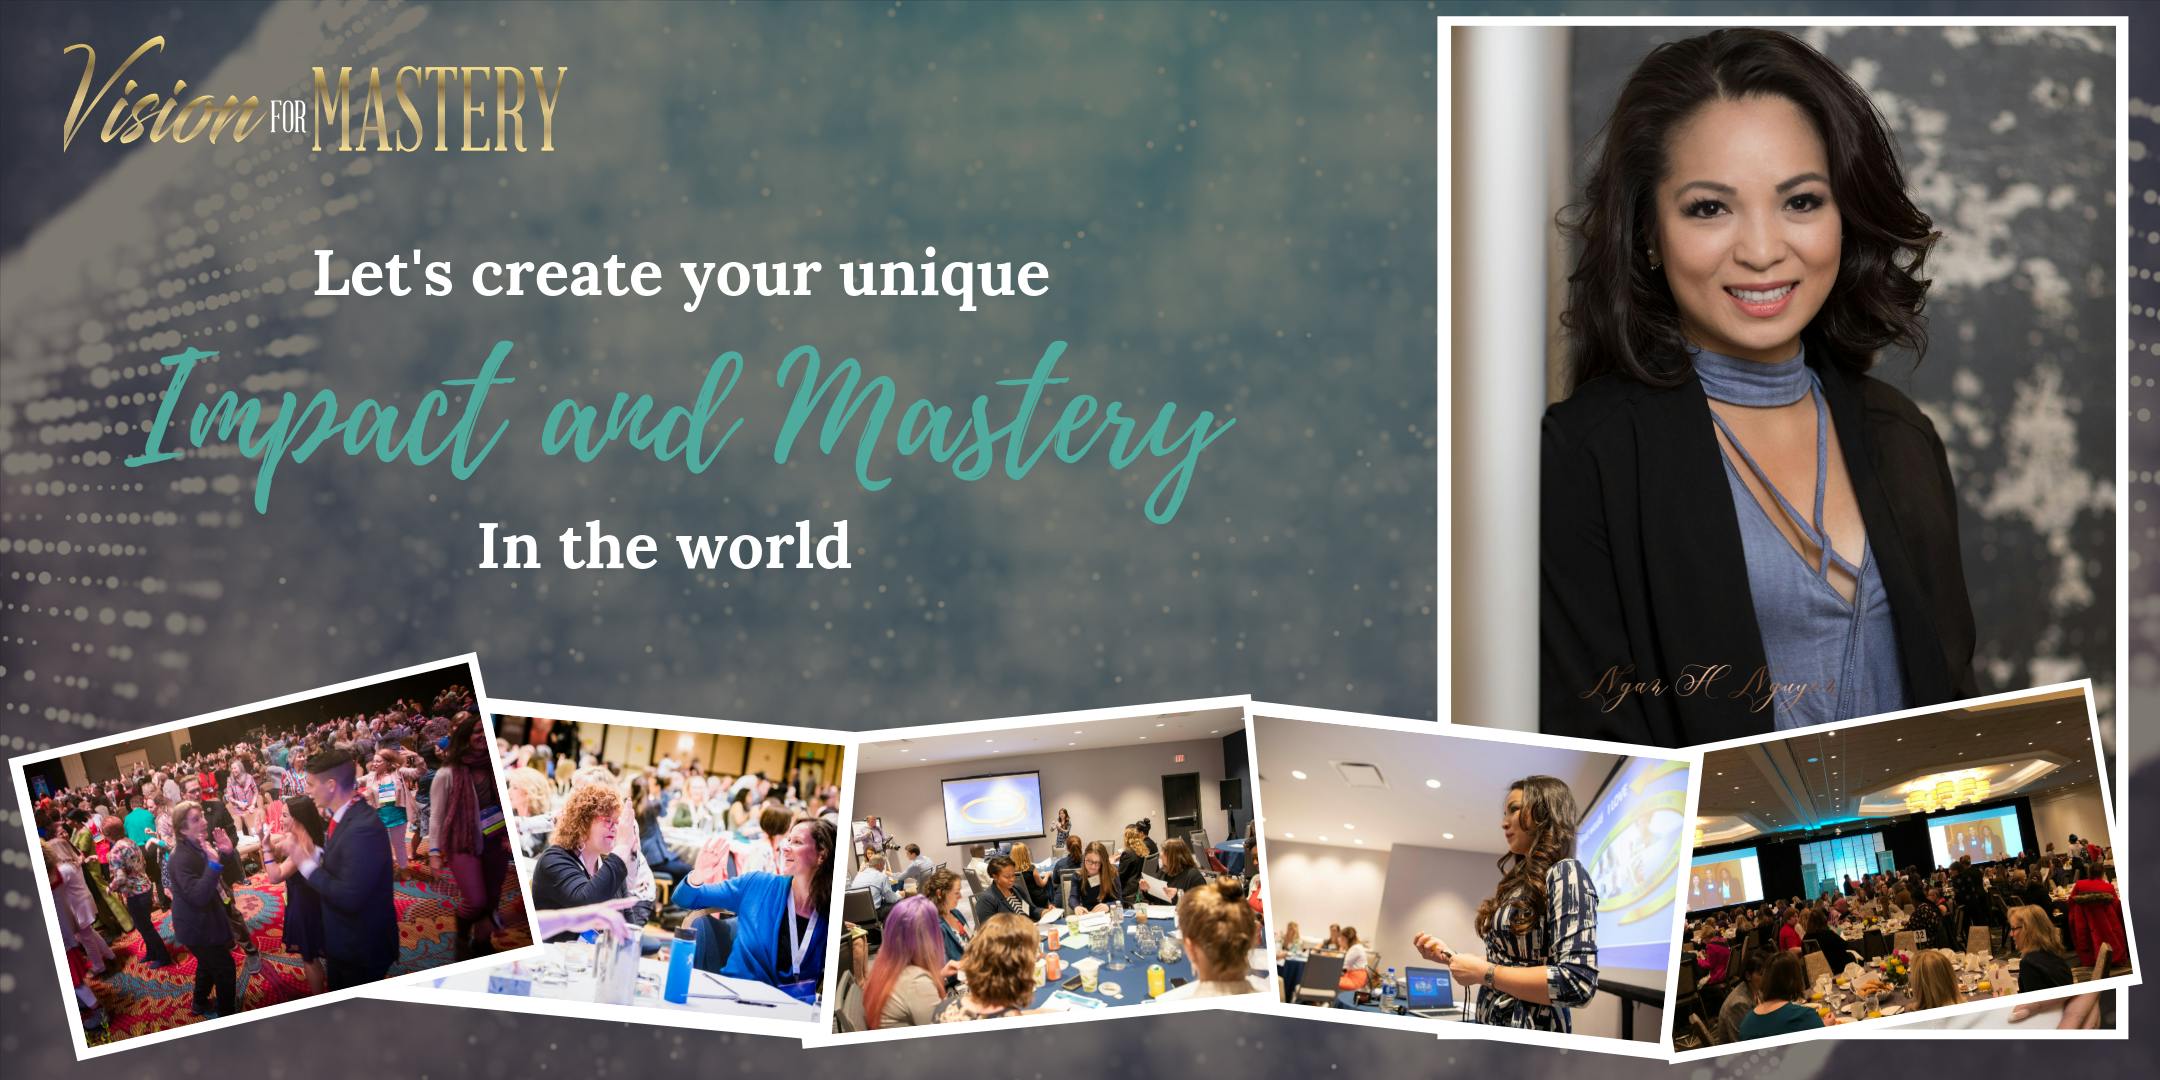 Vision For Mastery: Creating Your Unique Success and Impact (Miami 2020)